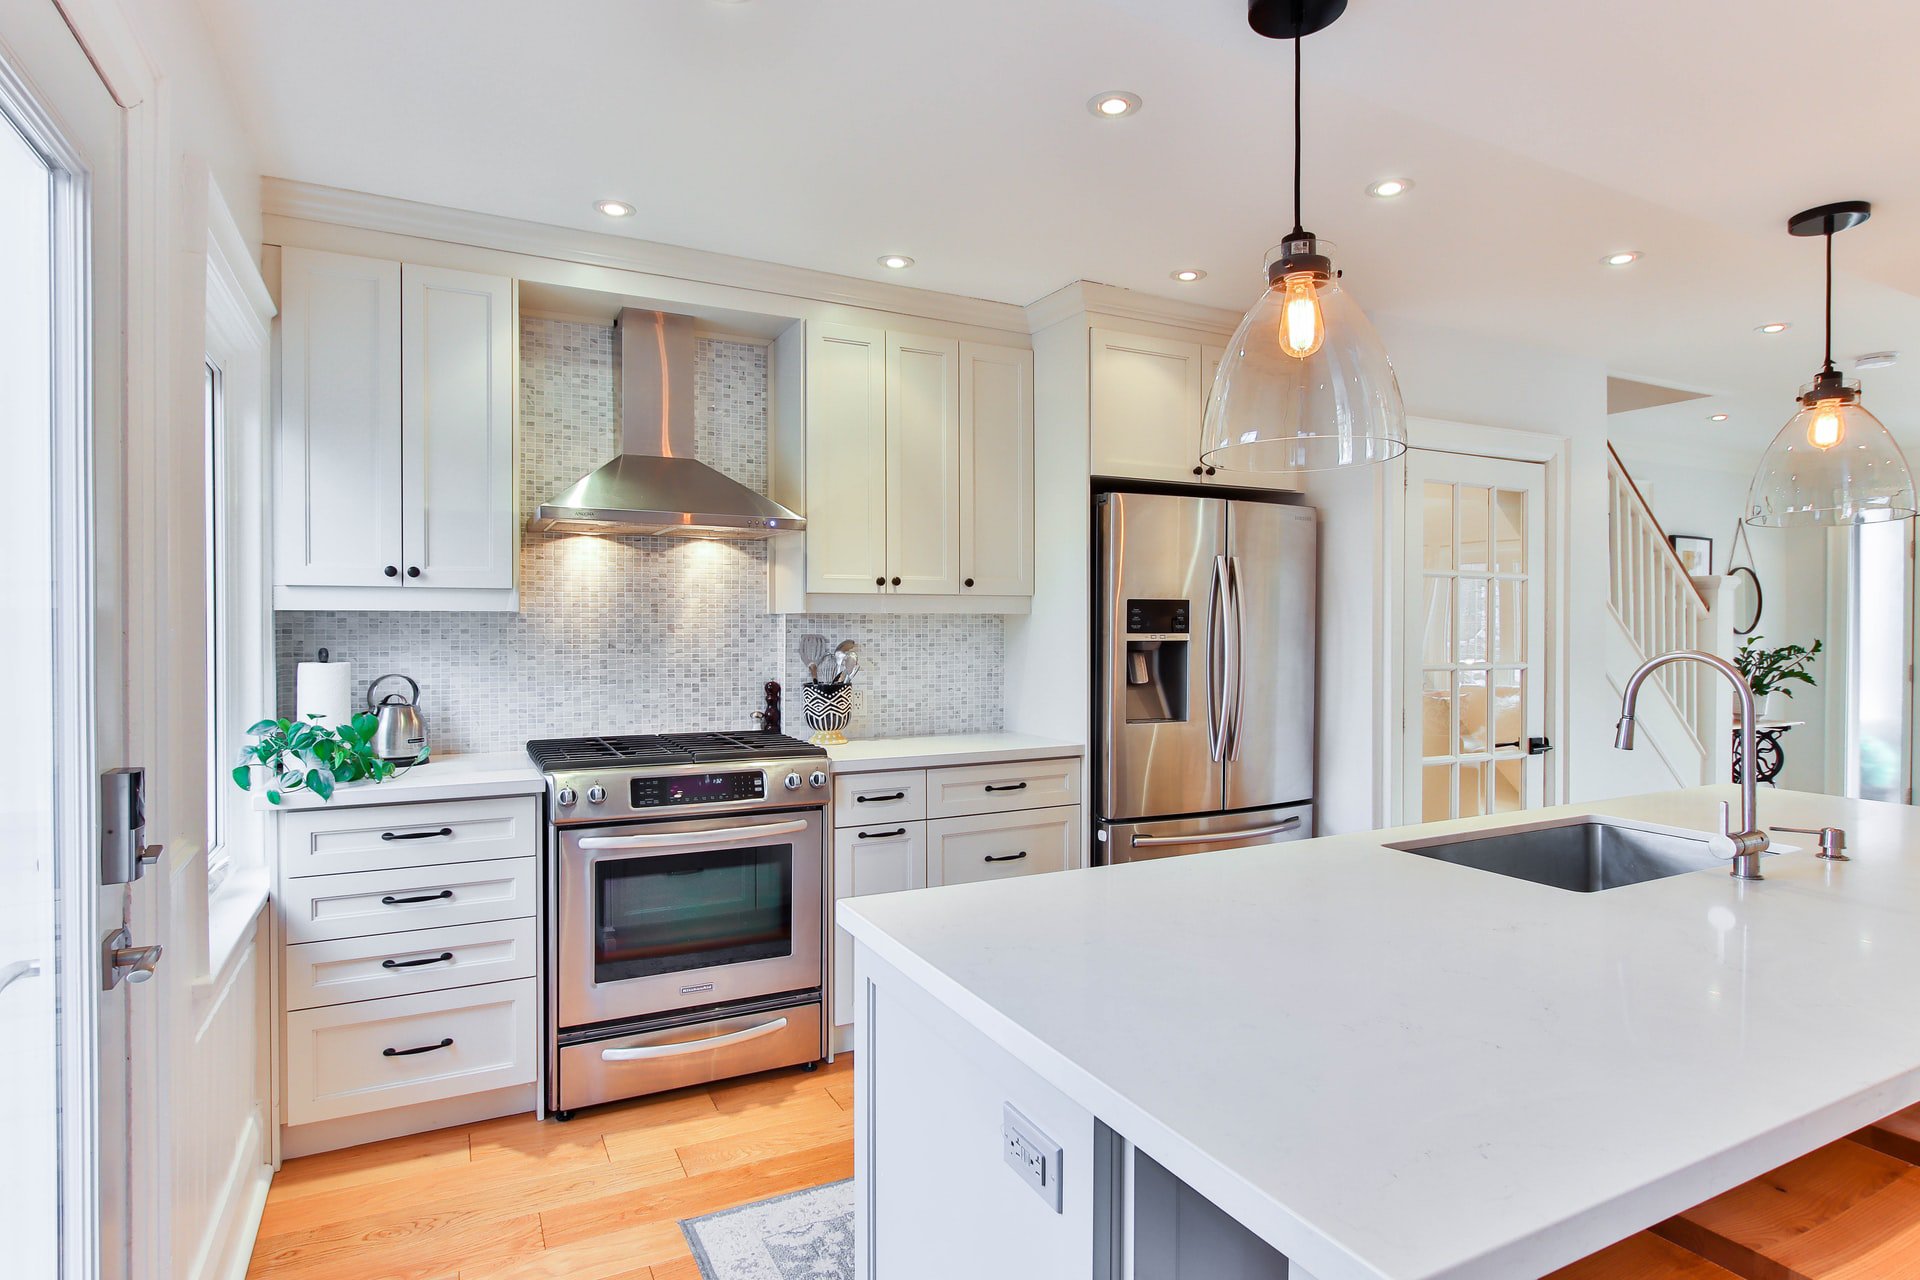 2. White Cabinets with Warm Wood Floors